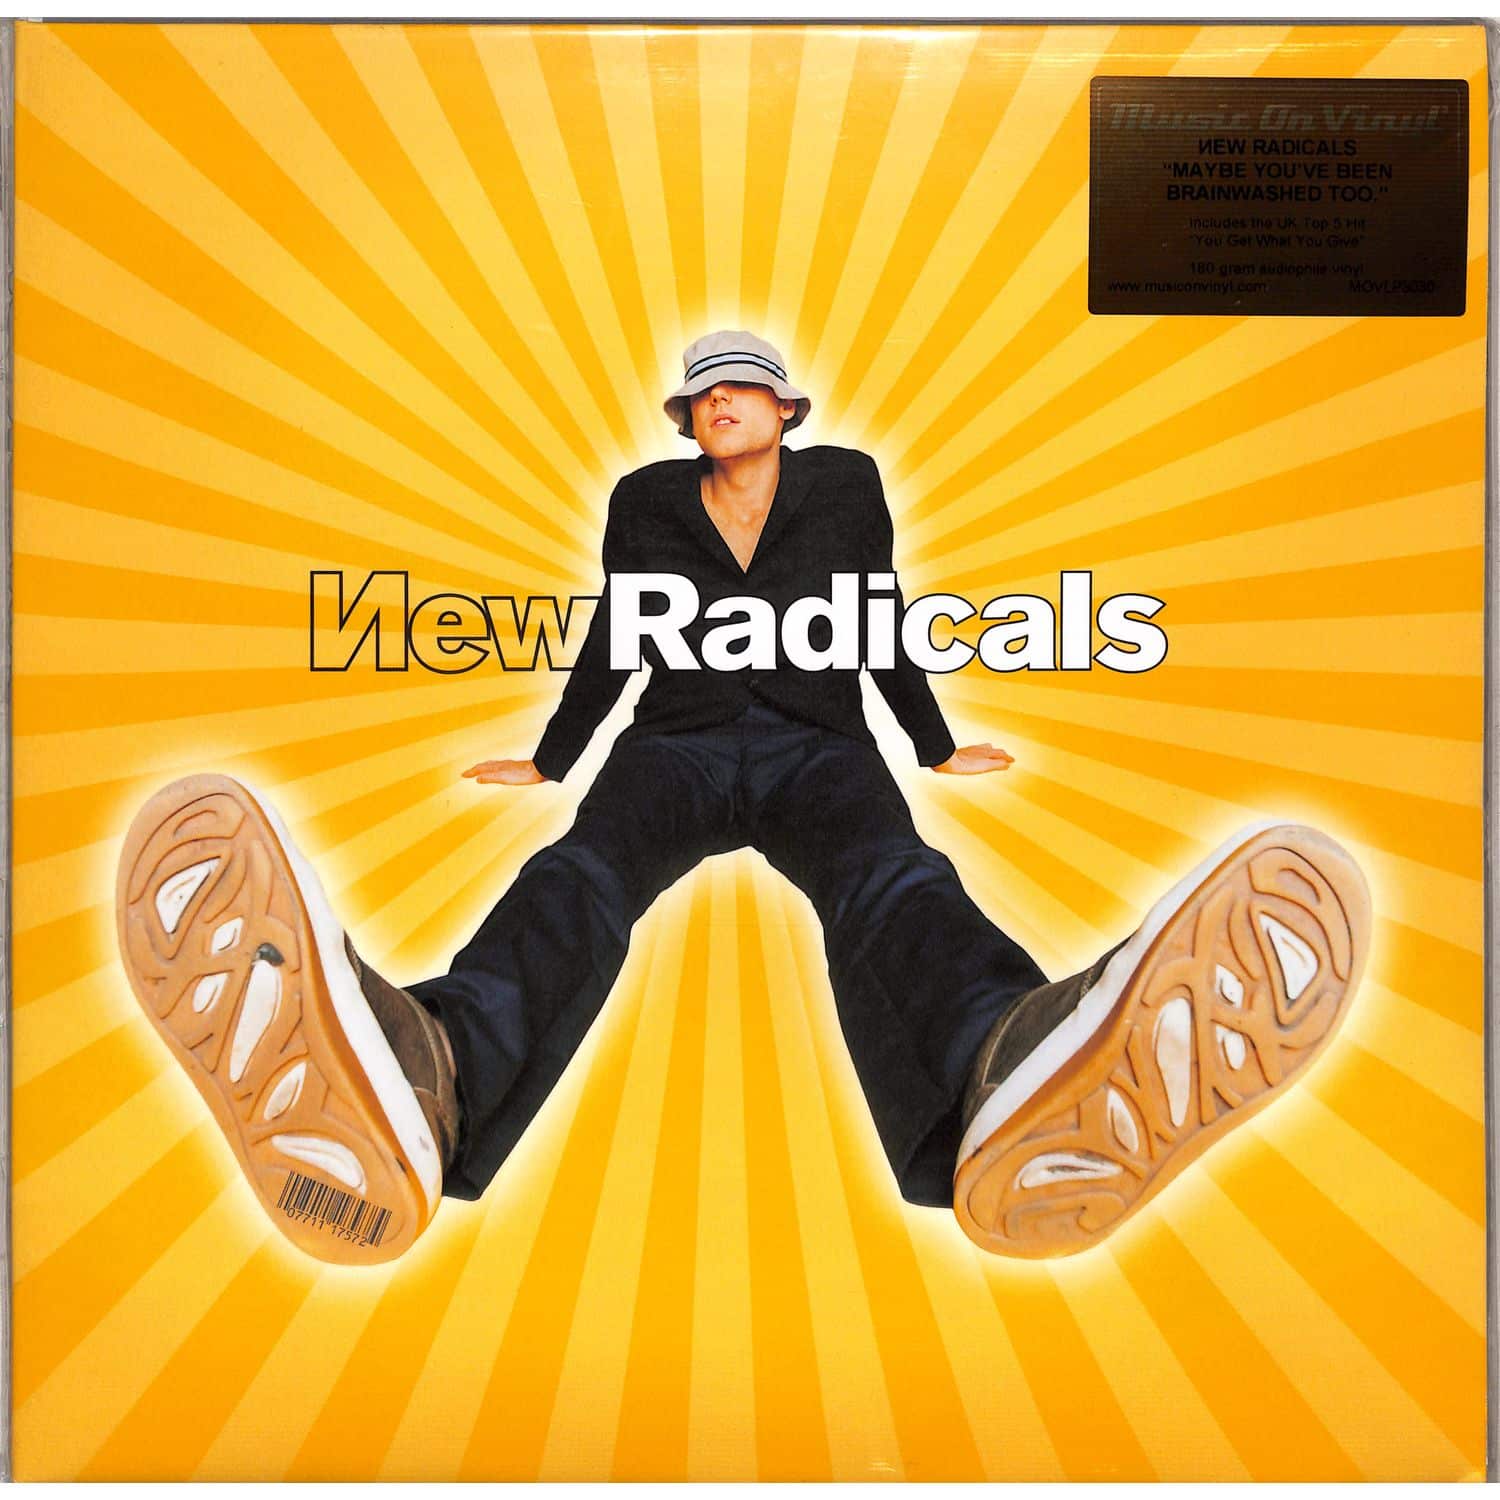 New Radicals - MAYBE YOU VE BEEN BRAINWASHED TOO 